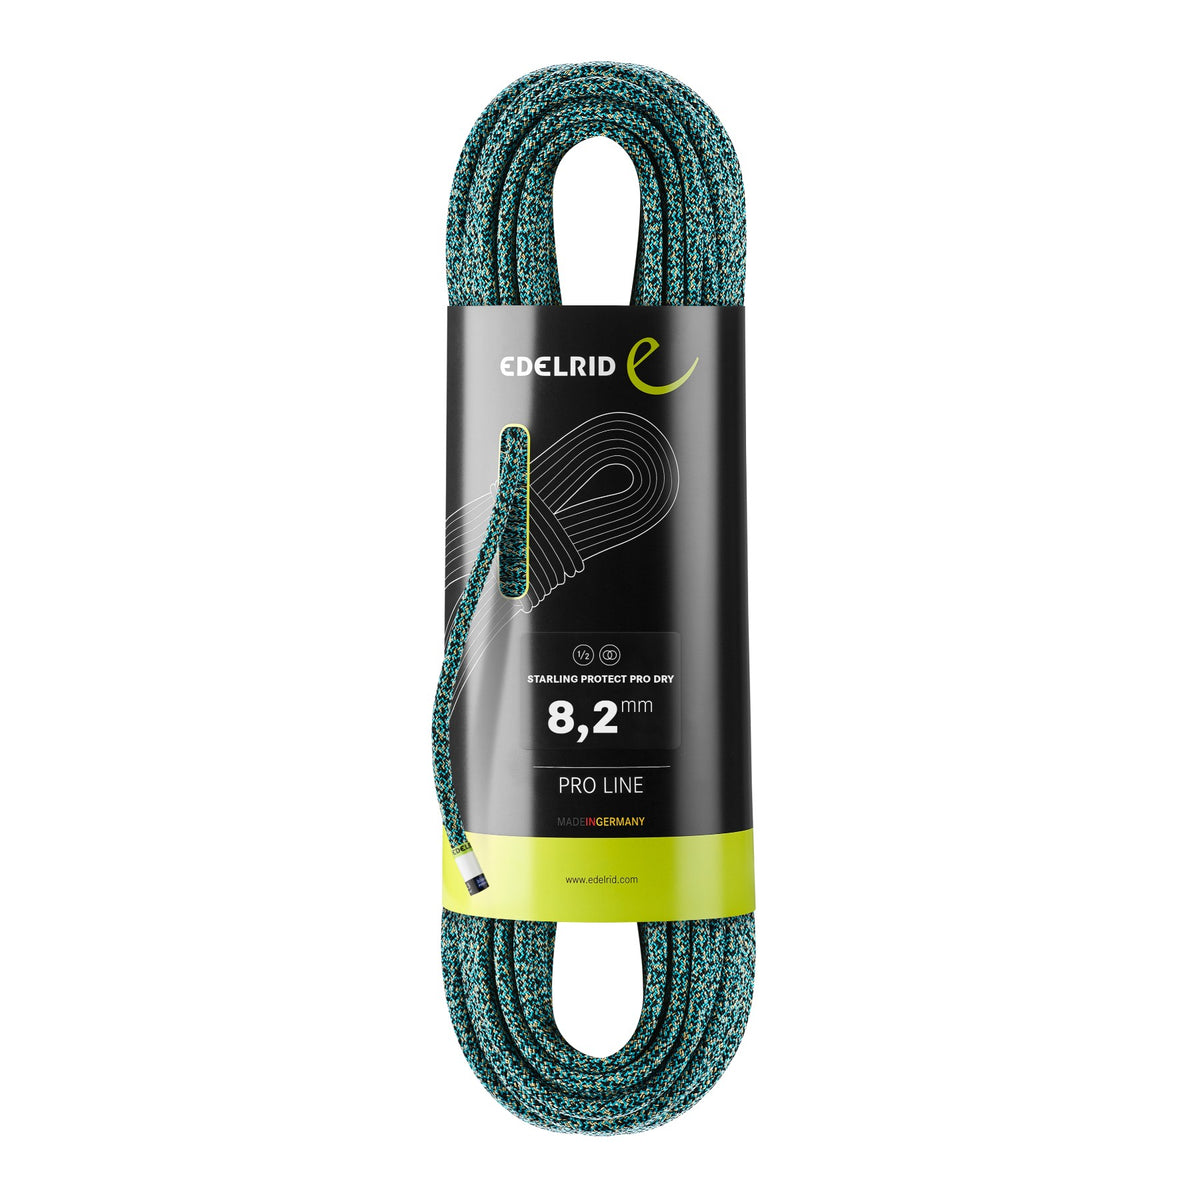 Edelrid Starling Protect Pro Dry 8.2mm x 60m, Colour Ice Mint-Night